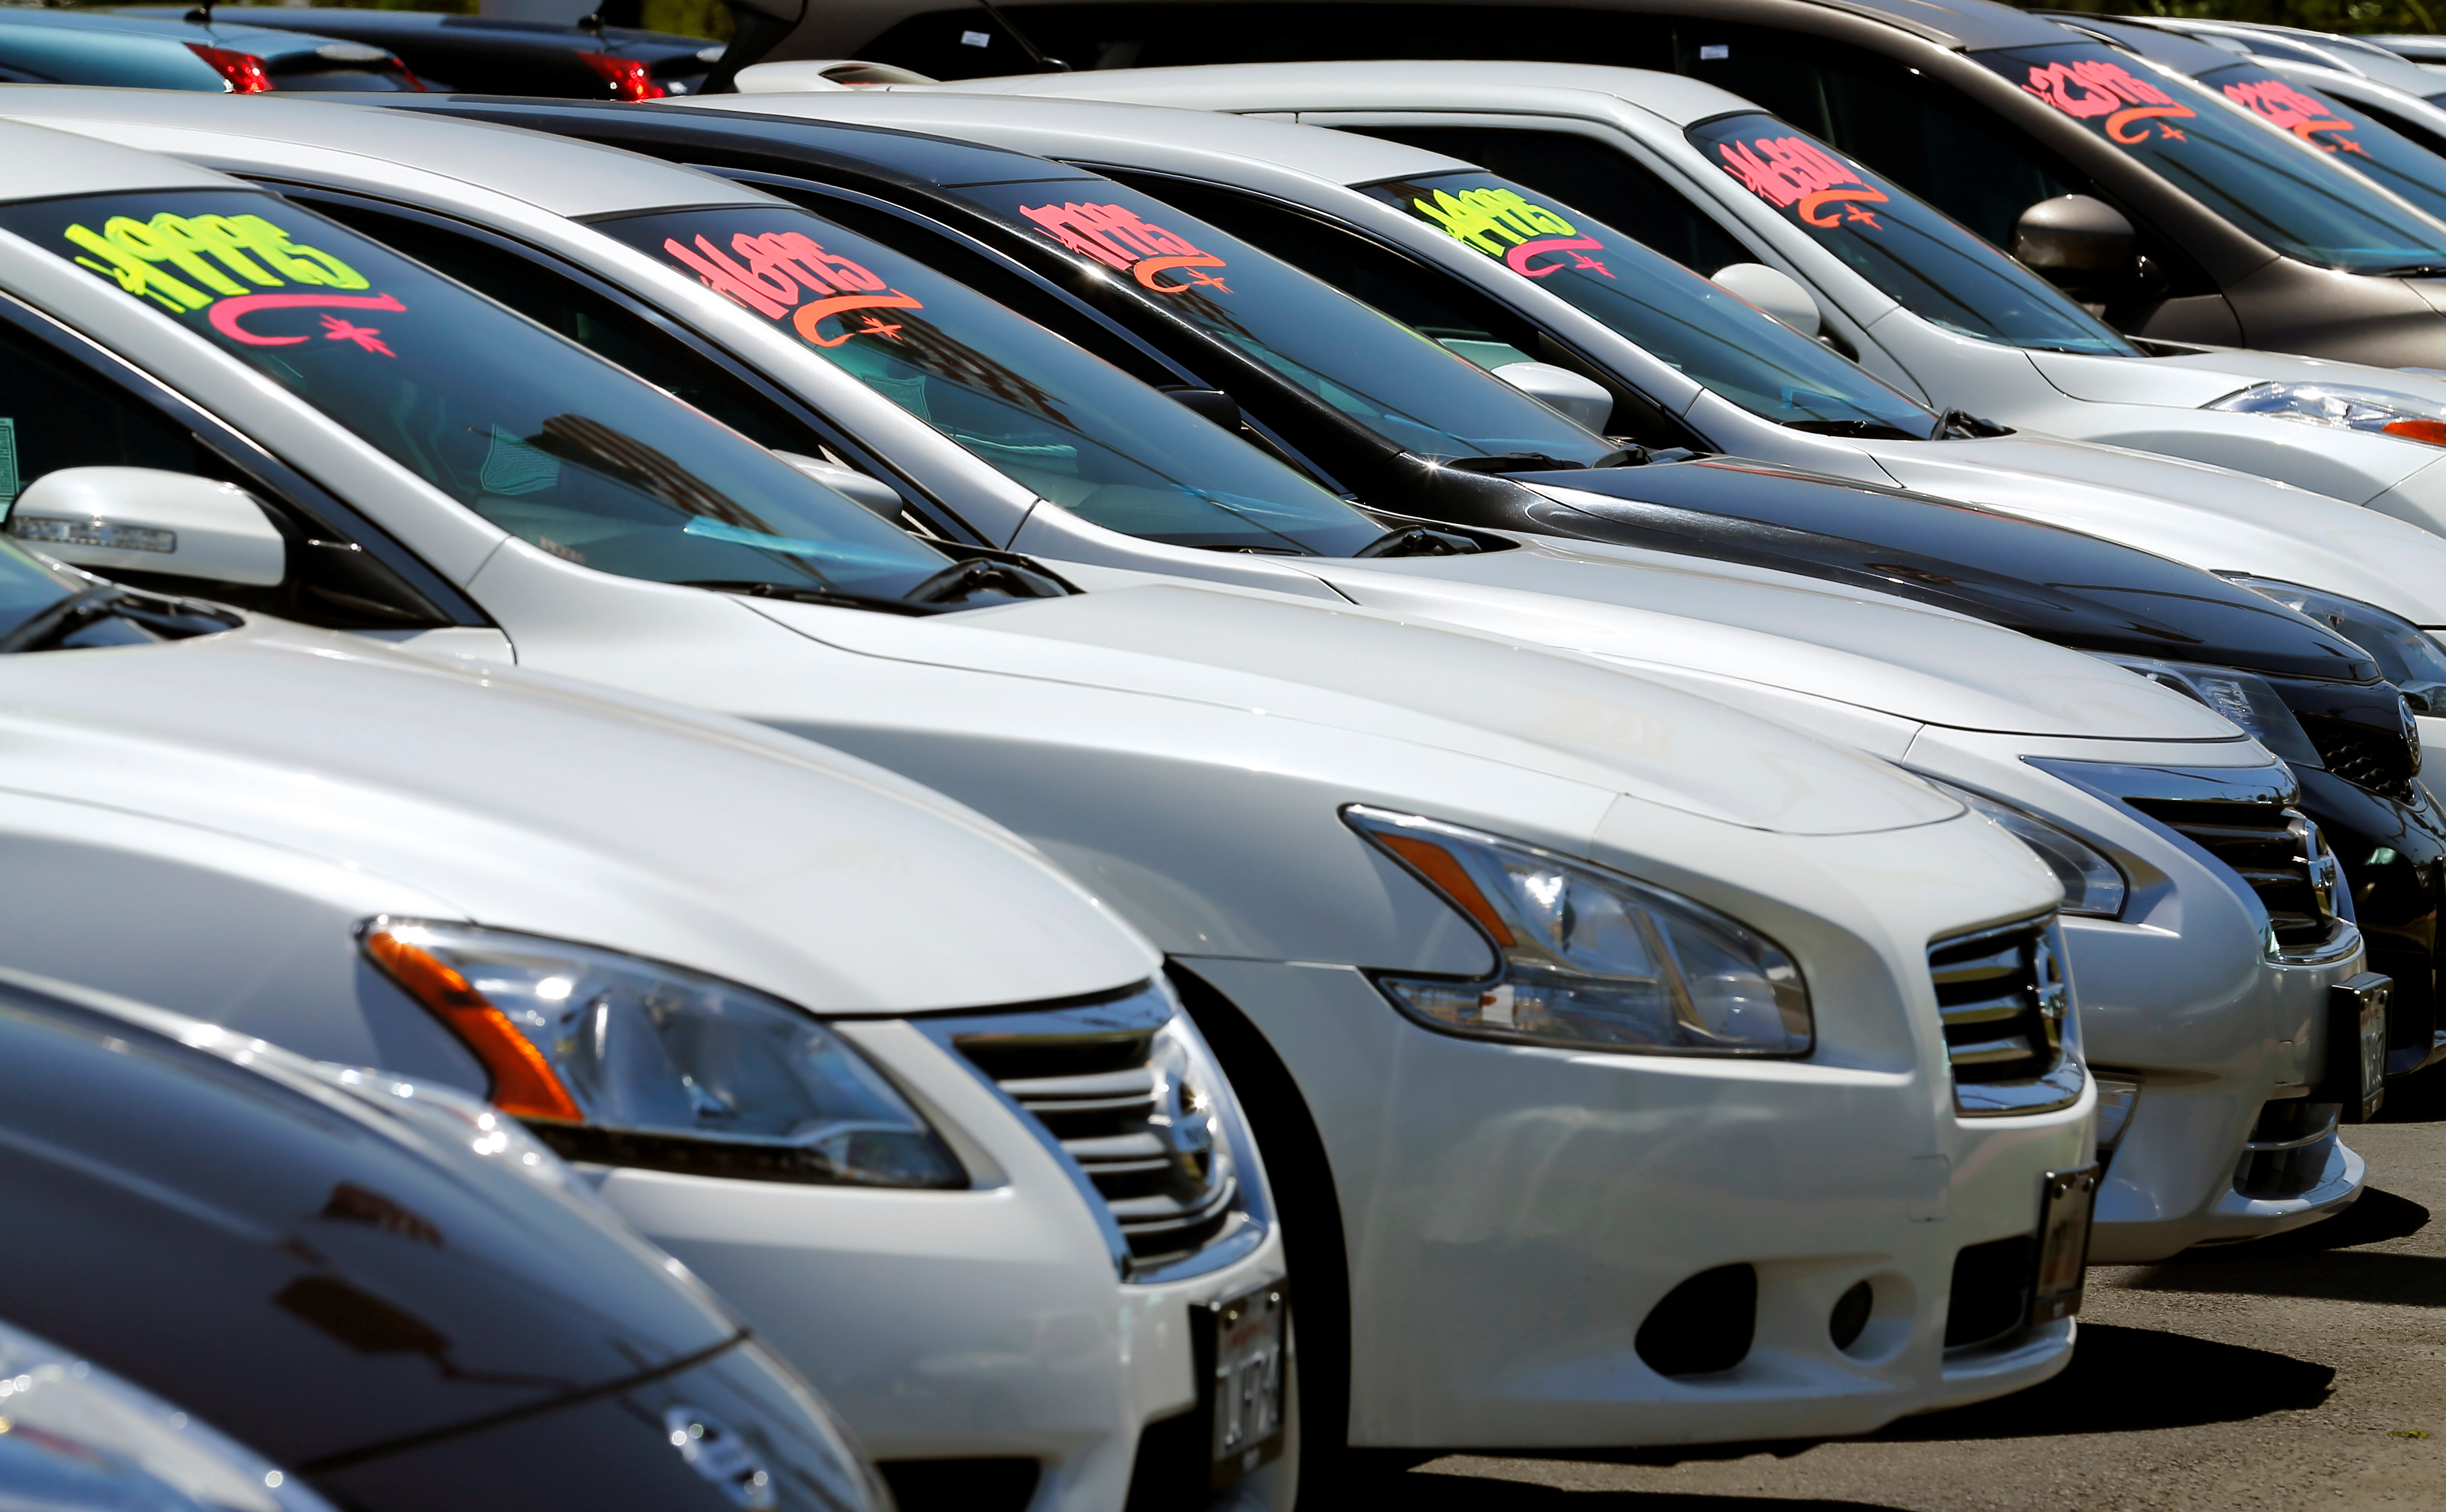 FILE PHOTO - Automobiles are shown for sale at a car dealership in Carlsbad, California